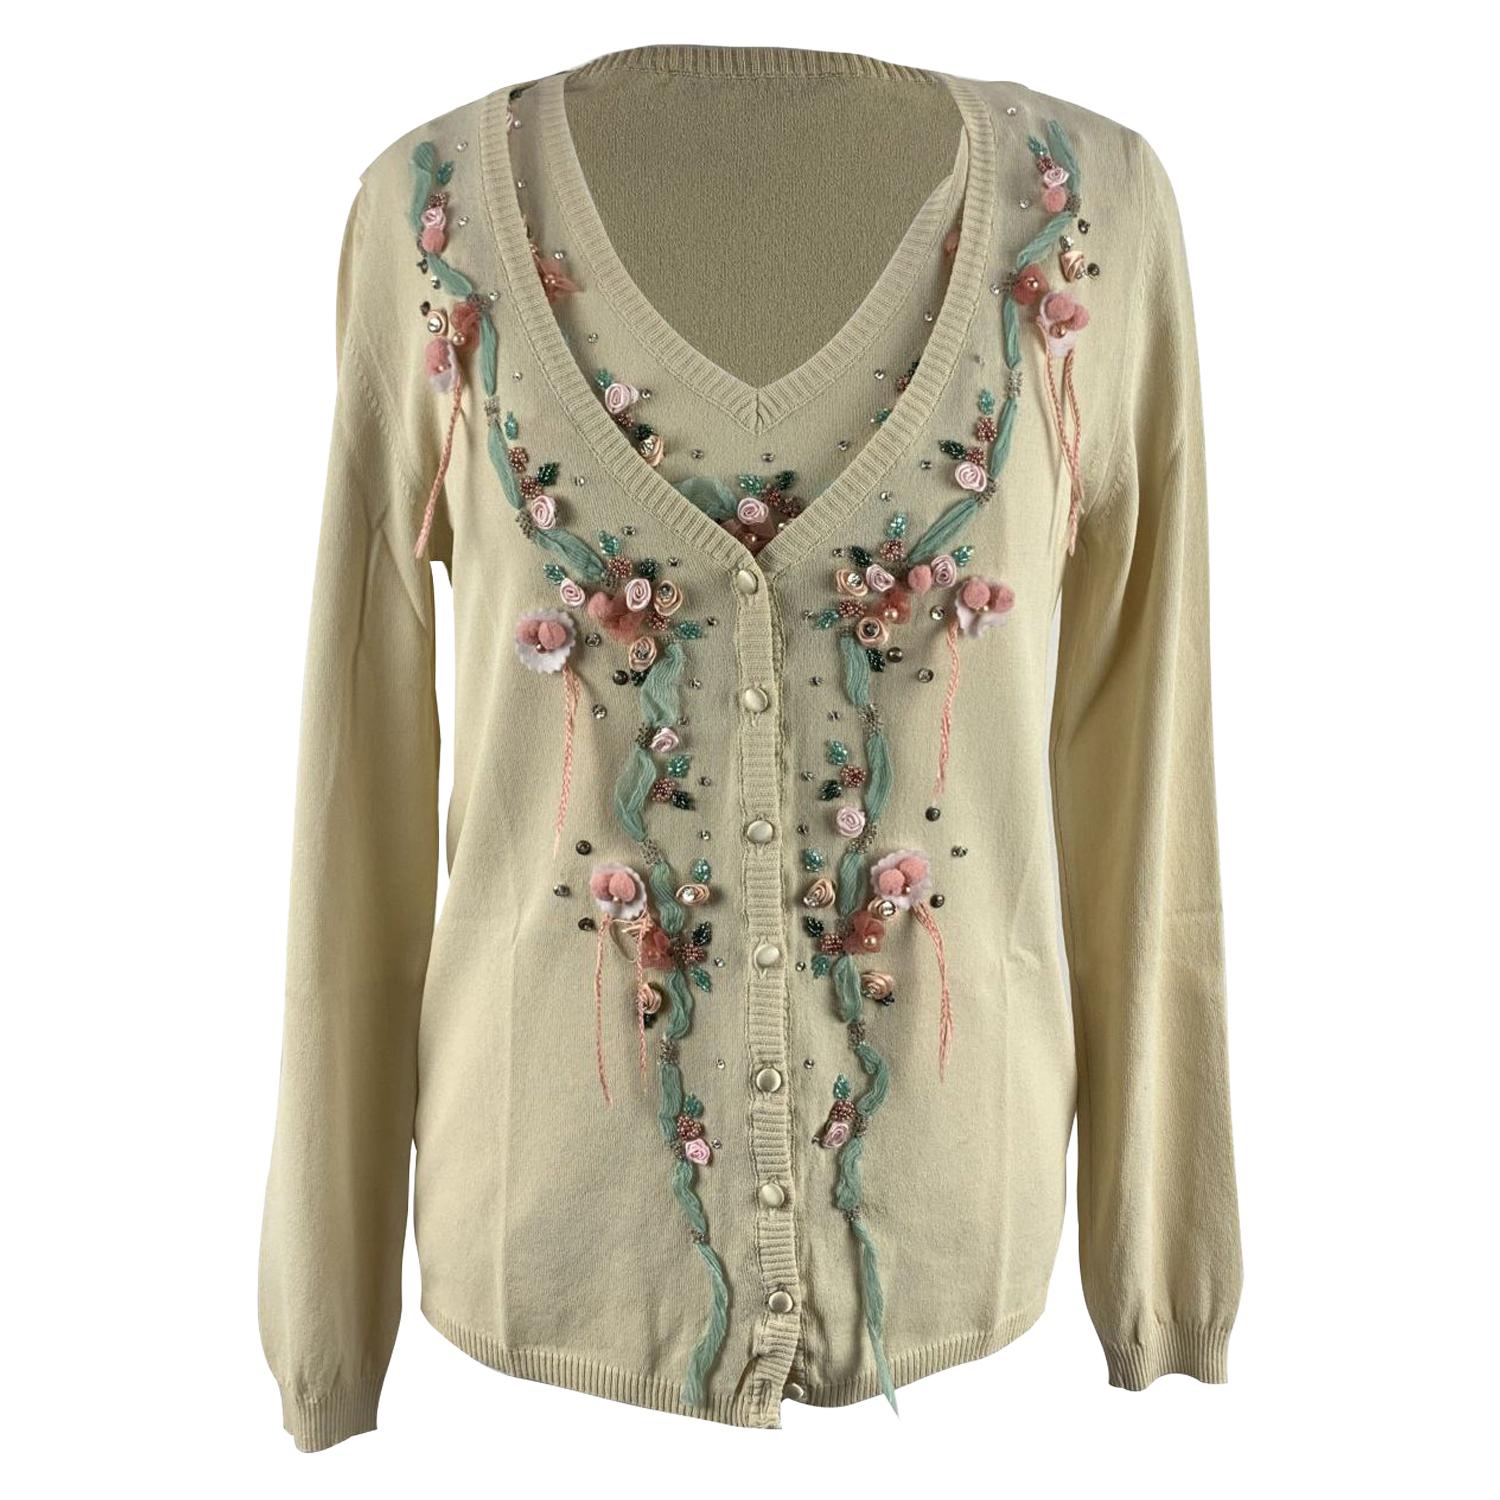 Blumarine Beige Viscose Floral Cardigan and Top Twin Set Size 46 IT